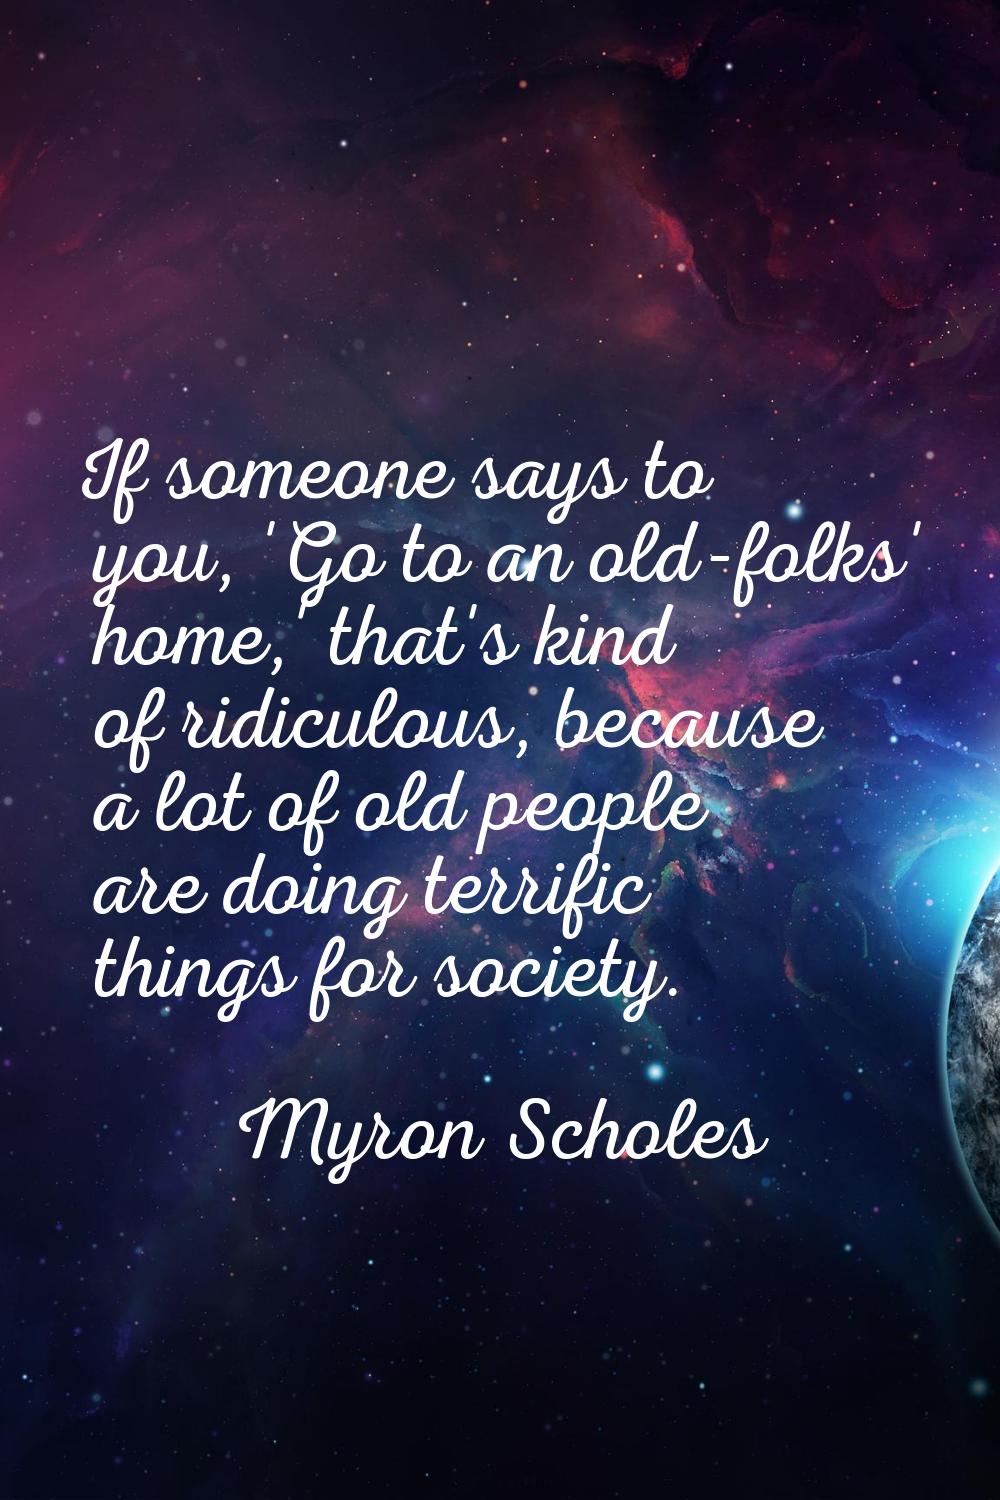 If someone says to you, 'Go to an old-folks' home,' that's kind of ridiculous, because a lot of old